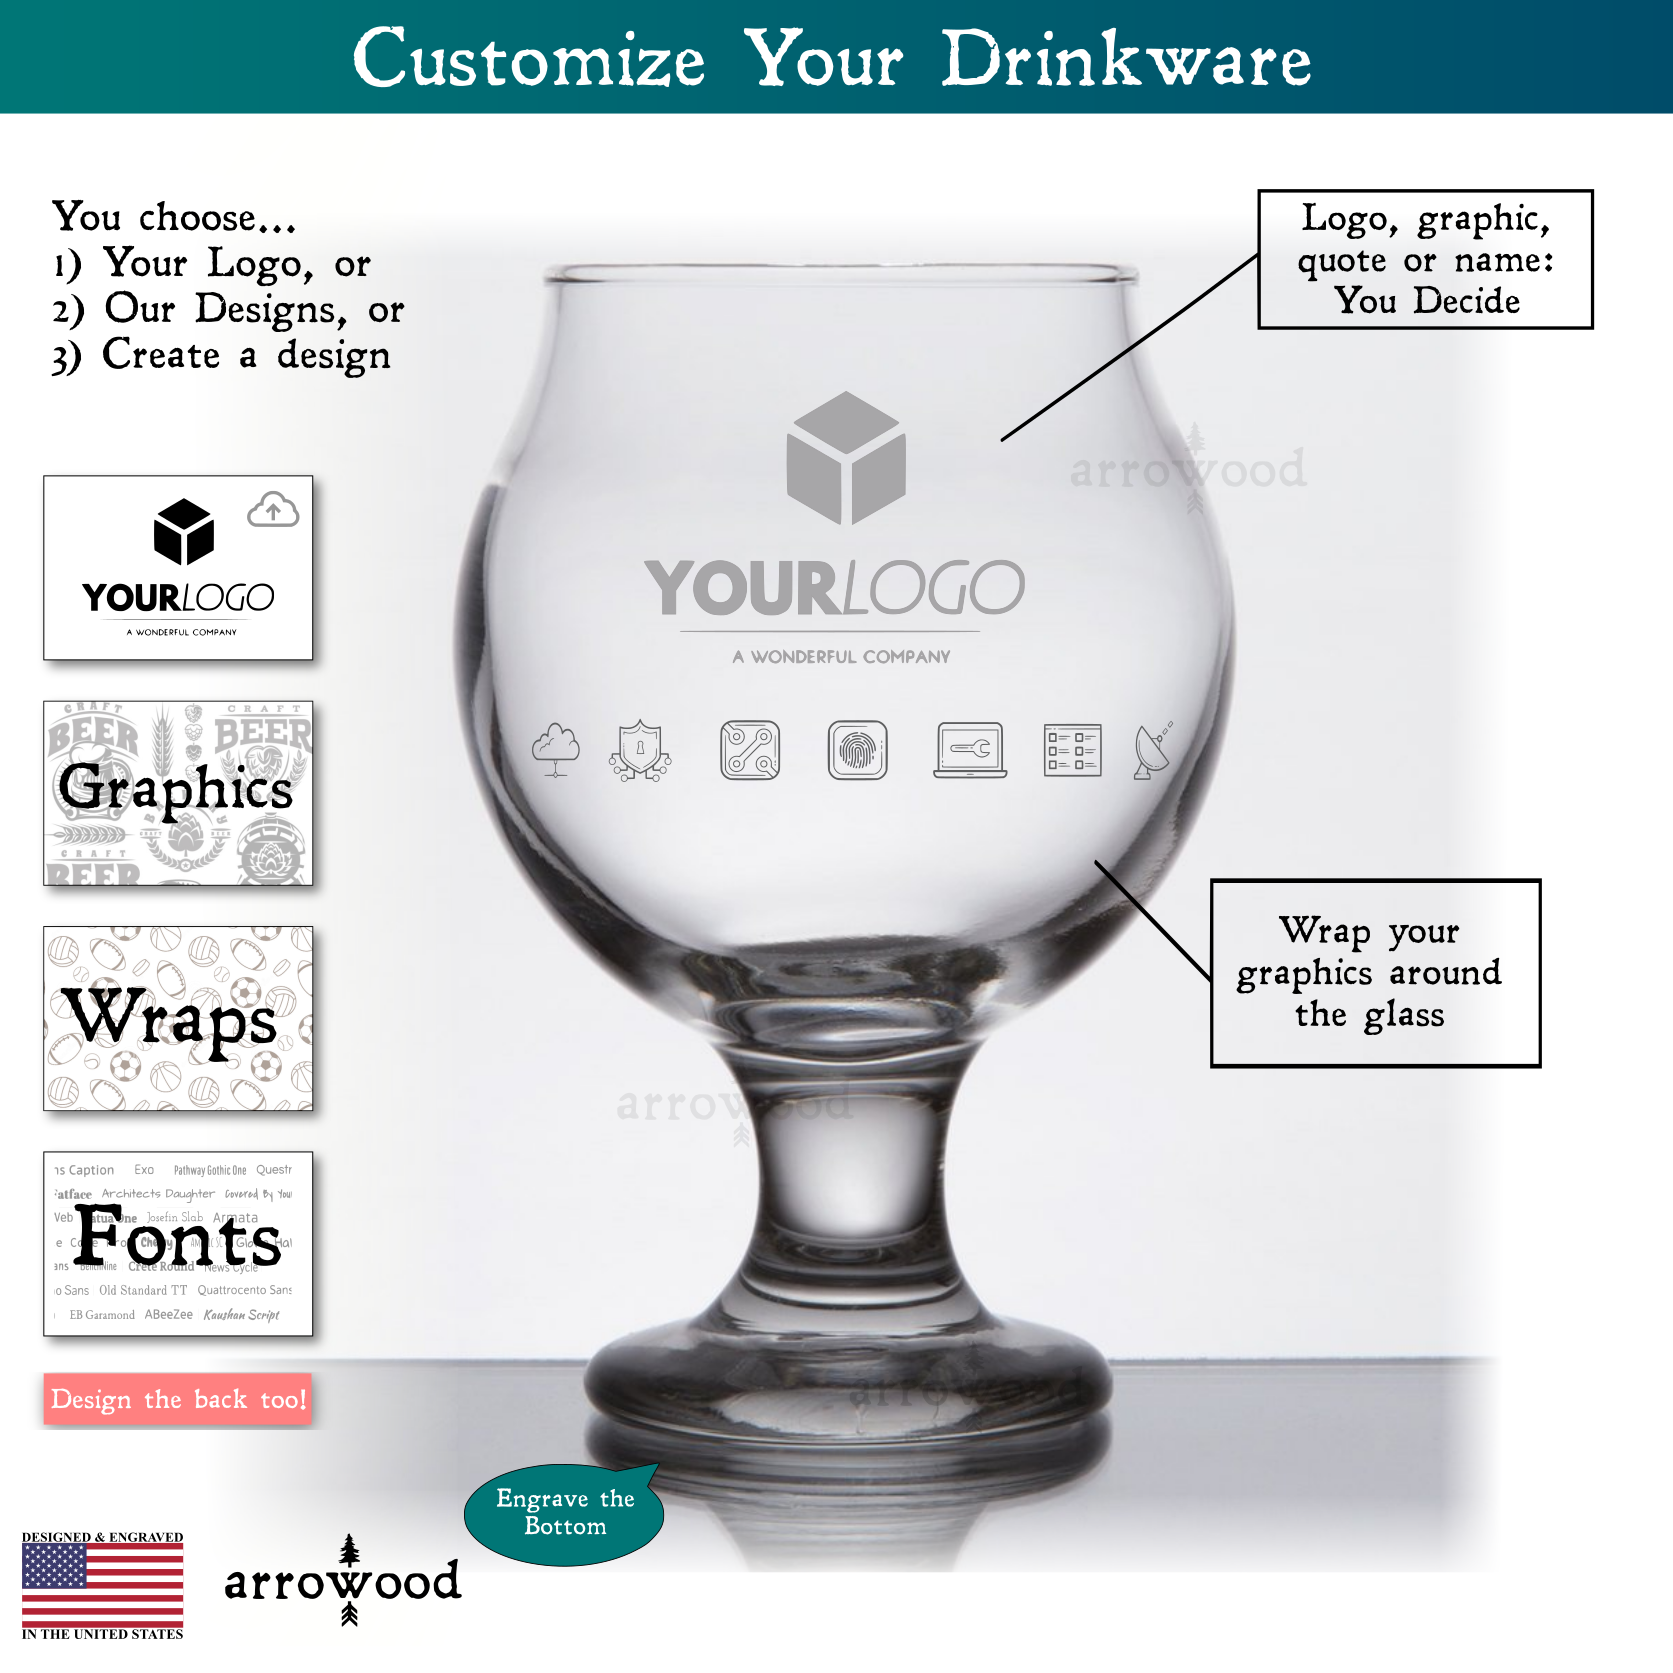 5 oz Libbey Belgian Beer Tasting Glass - Laser engraved with your orga –  arrowood co - Engraved and Personalized Drinkware from Charlotte, NC